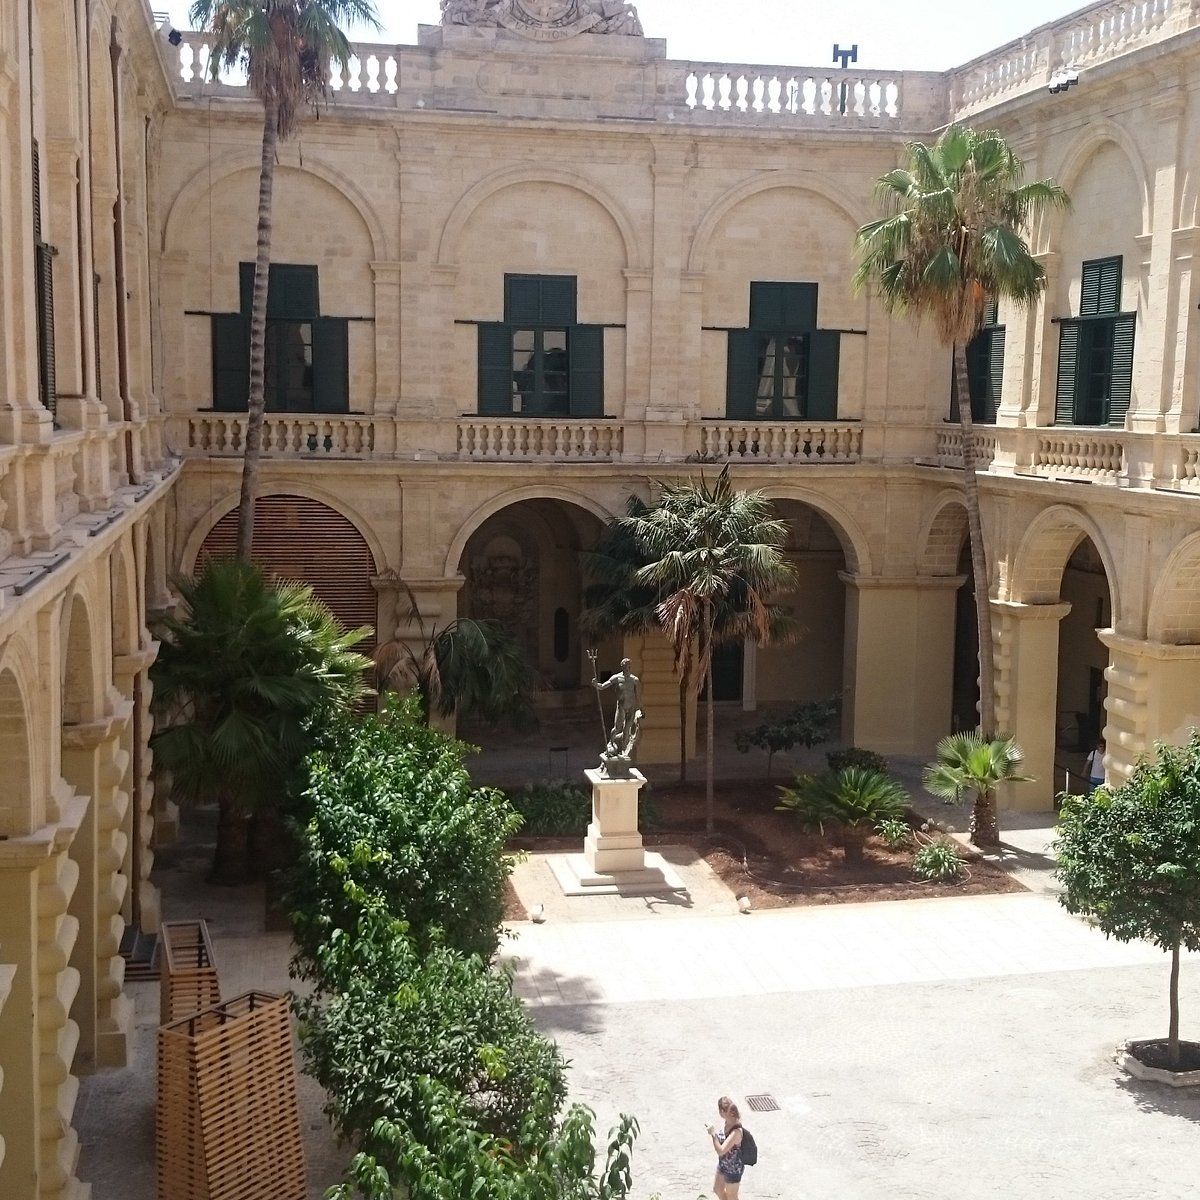 Open day at the Grand master's palace￼ - Oh My Malta